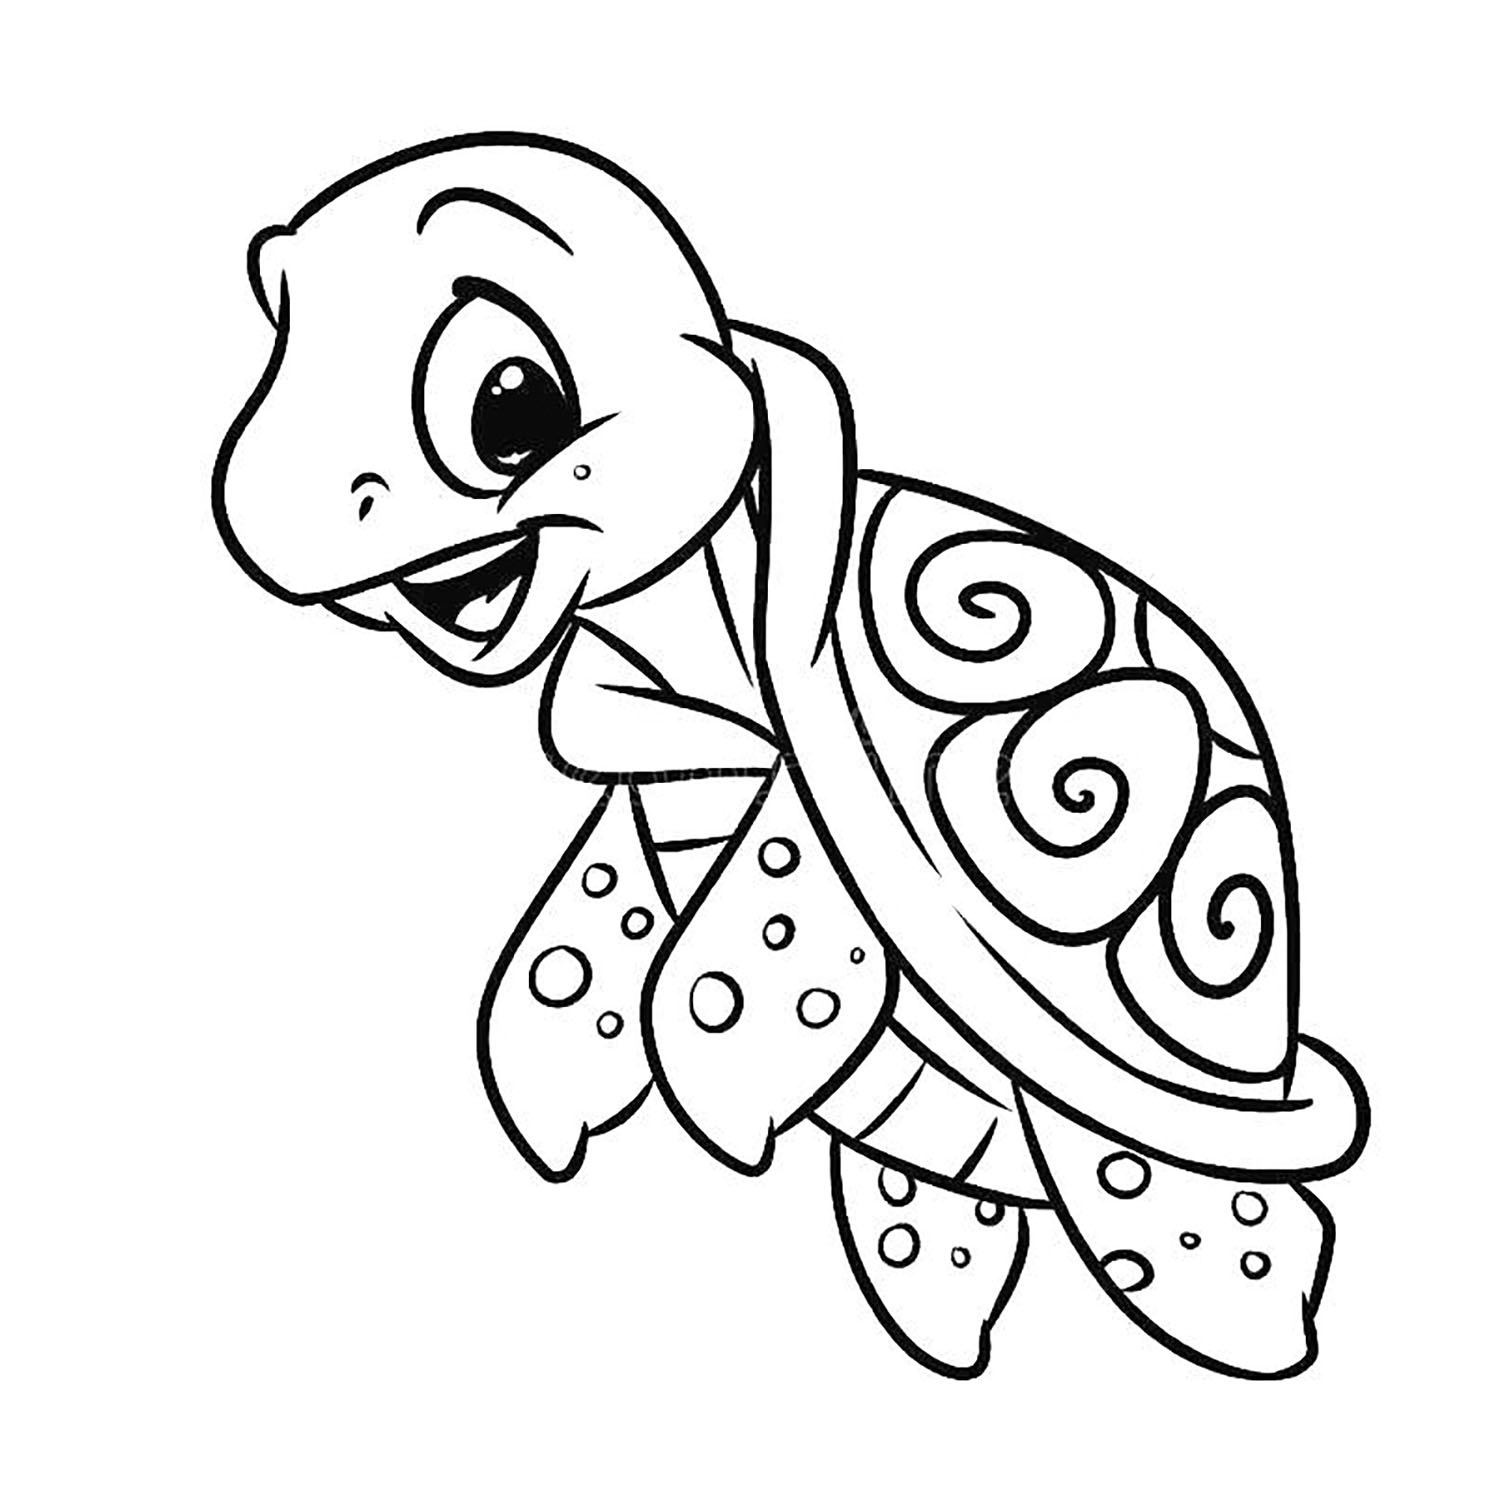 Simple turtle coloring pages